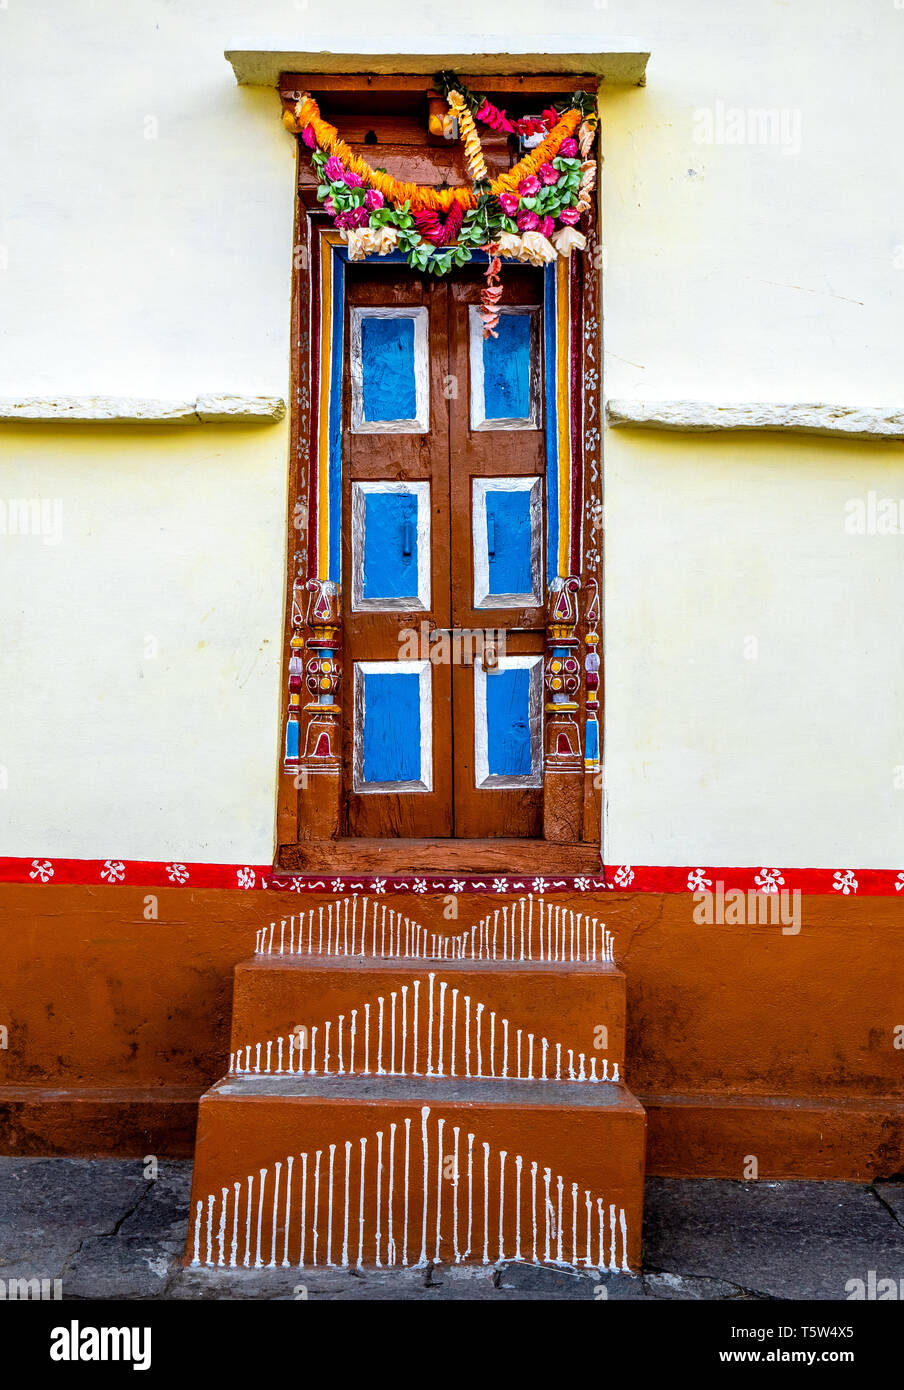 Decorated doors of a house in Supi village high up in the Saryu Valley of the Uttarakhand Himalayas northern India Stock Photo